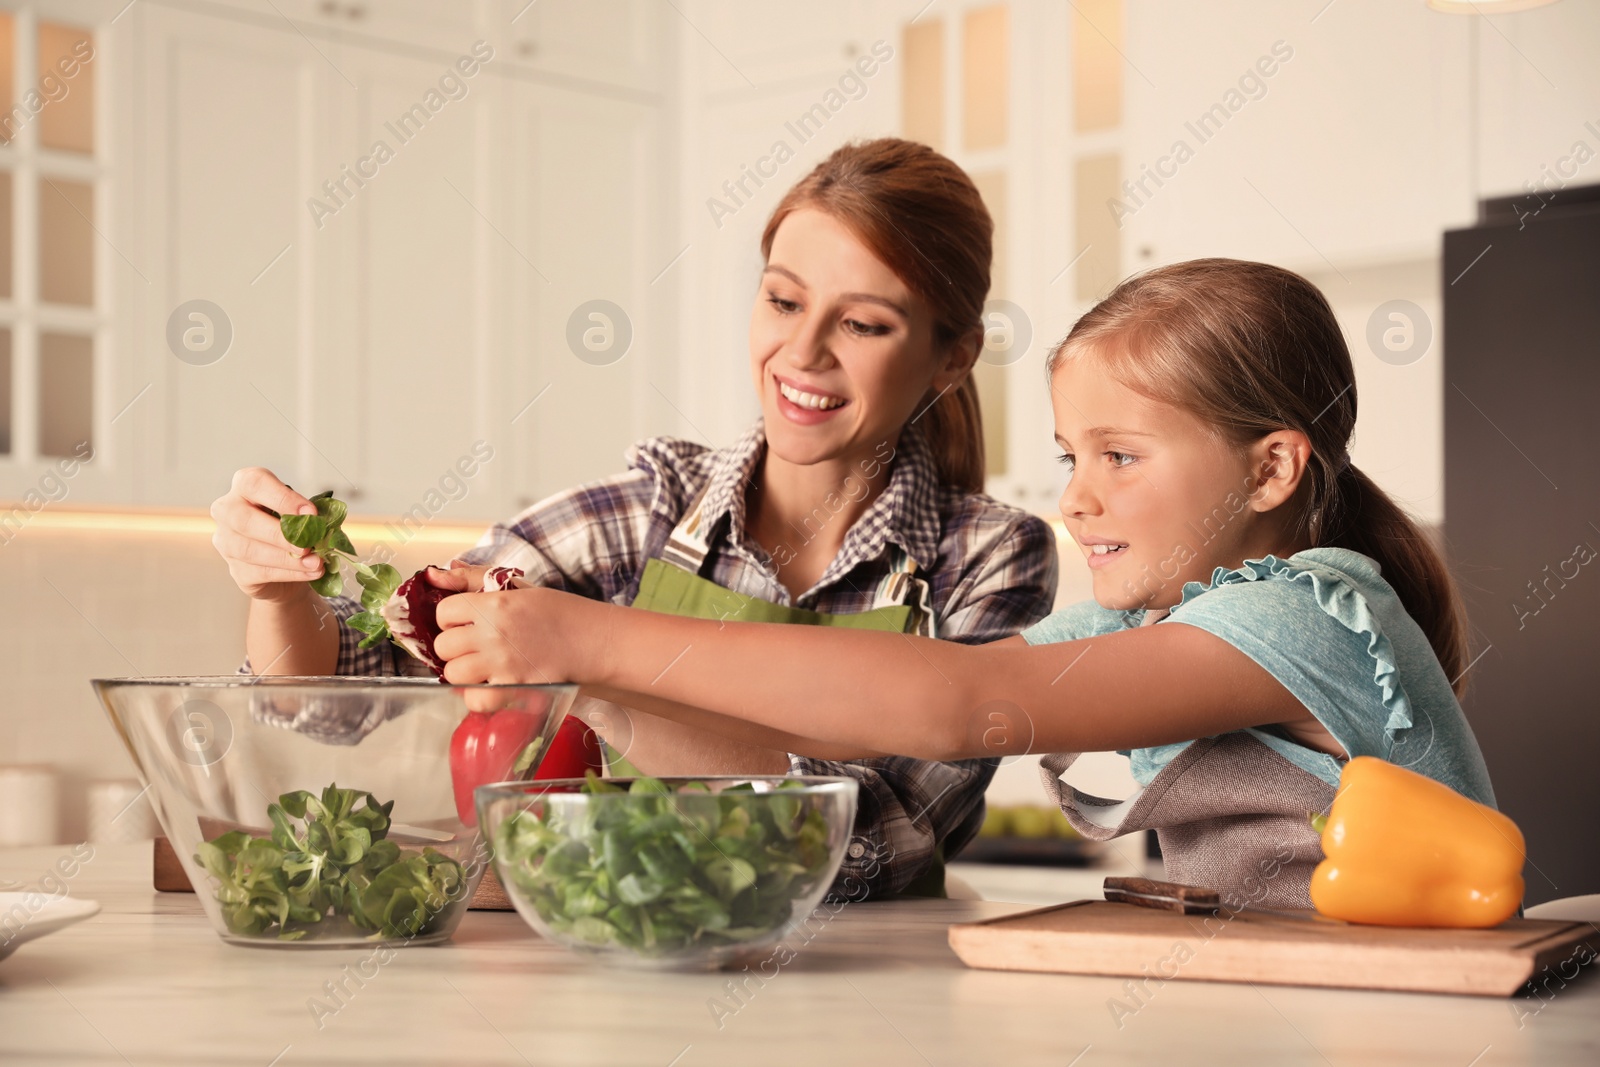 Photo of Mother and daughter cooking salad together in kitchen